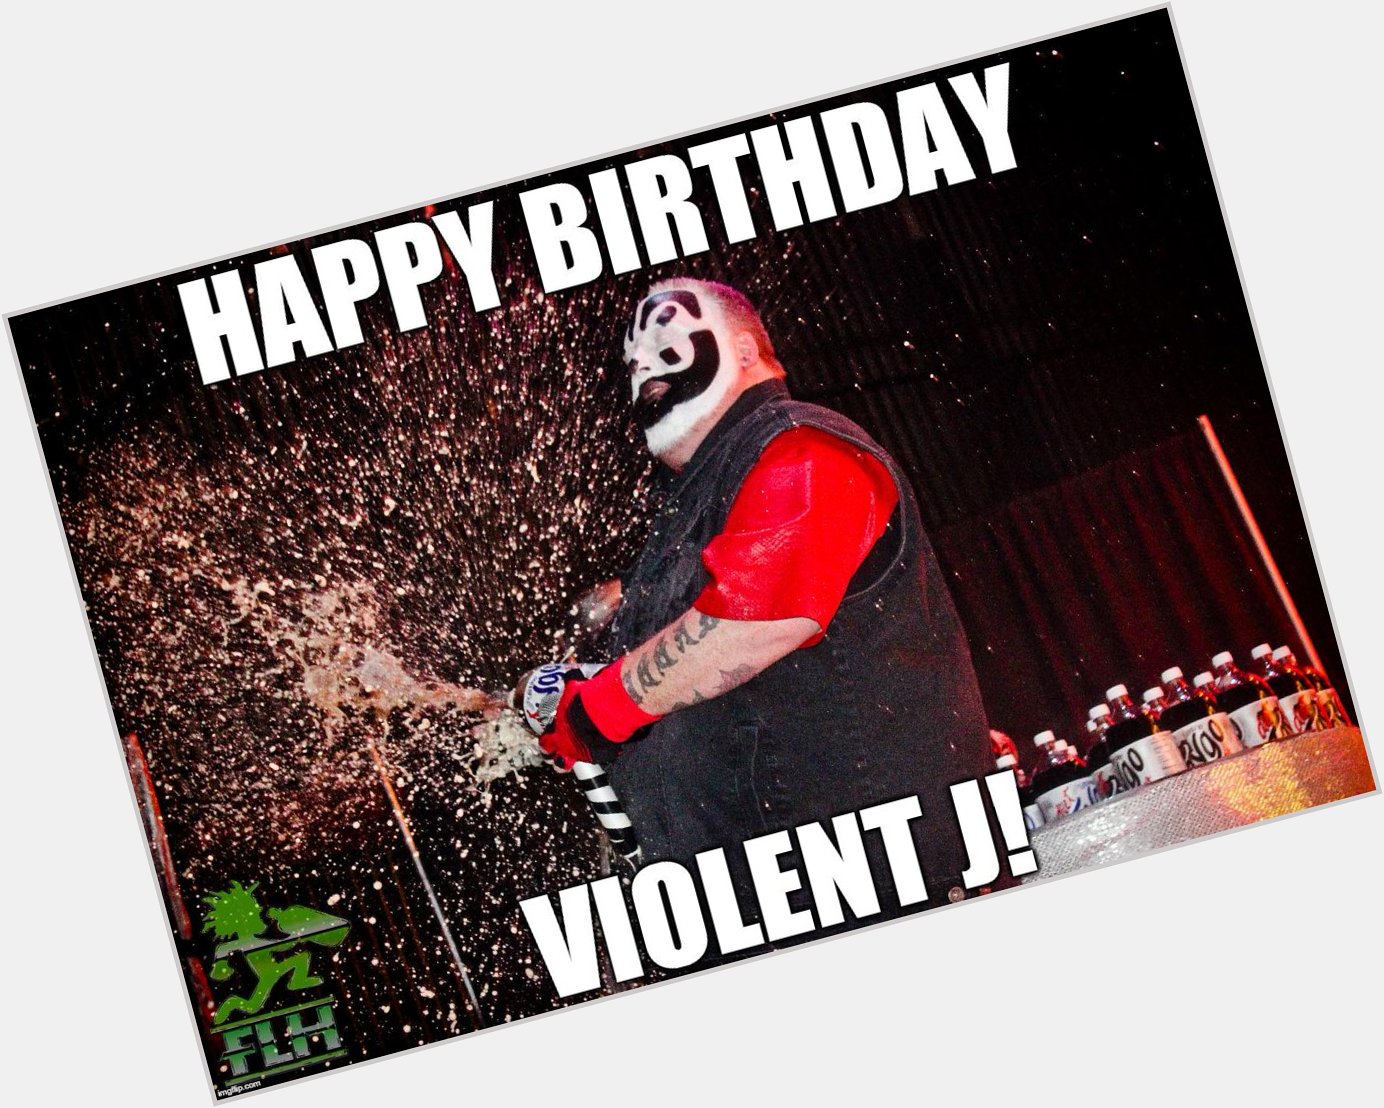 Happy Birthday to the Duke of the Wicked: Violent J of the 